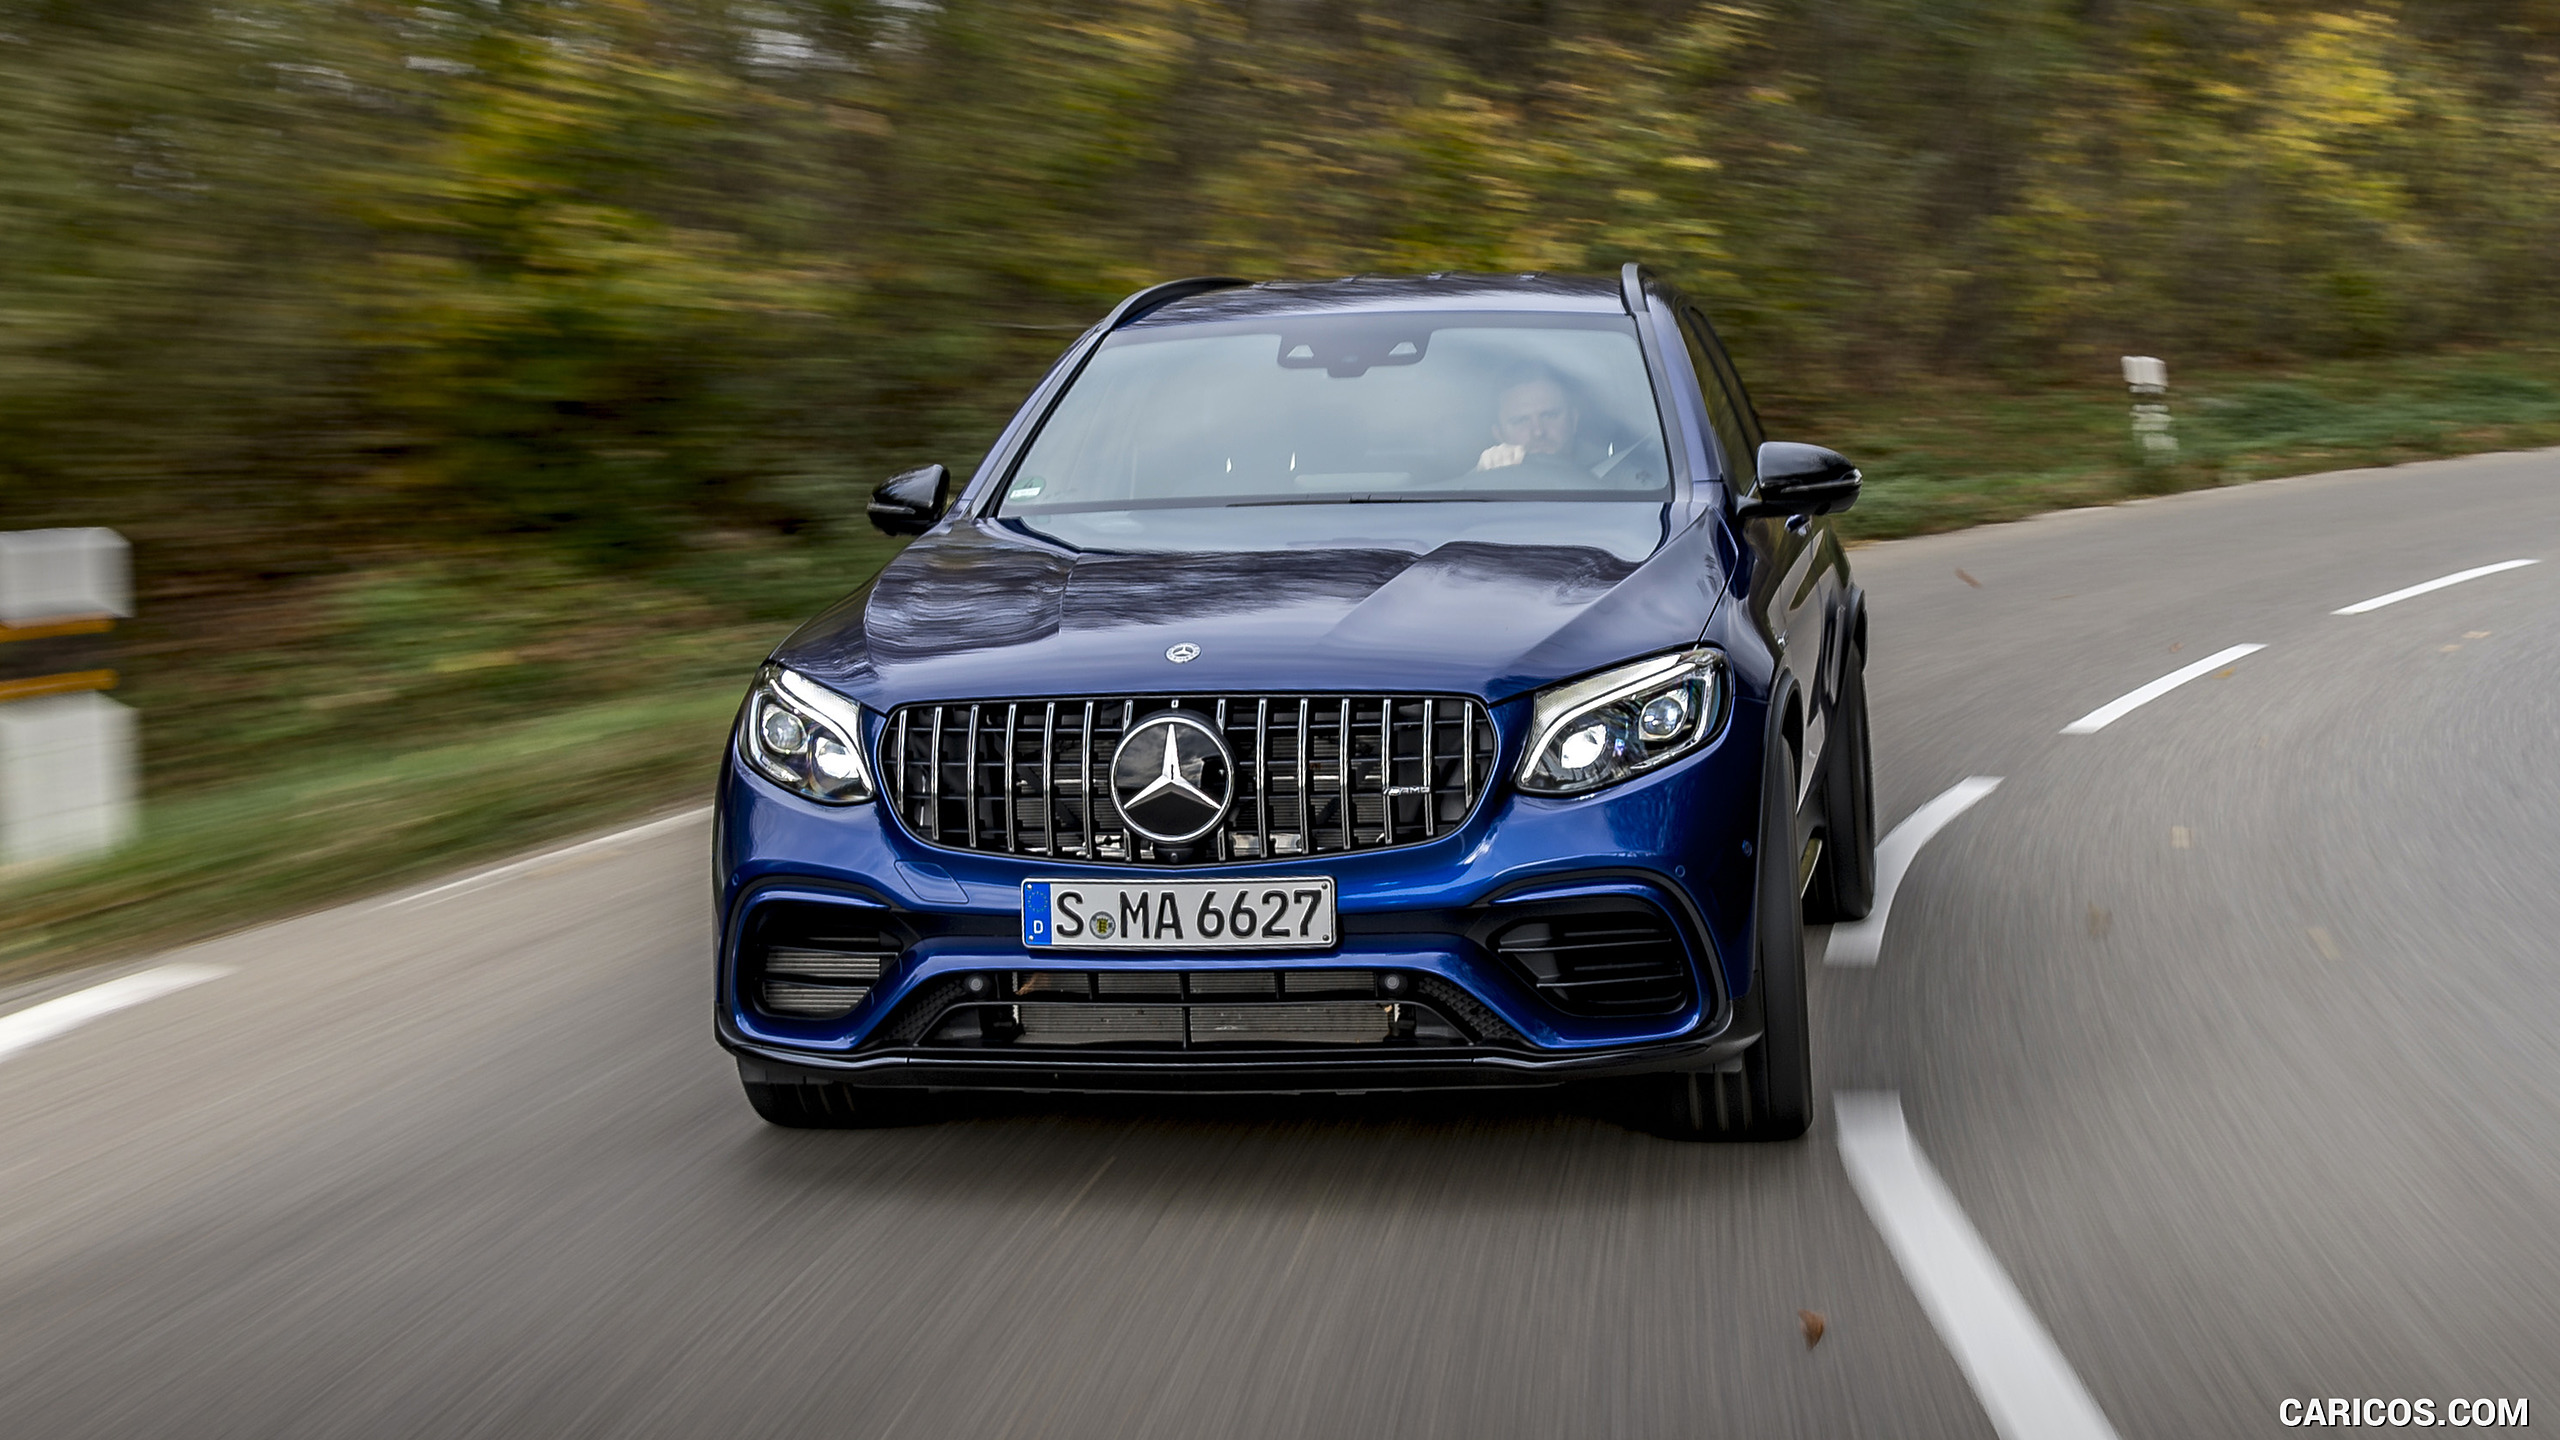 2018 Mercedes-AMG GLC 63 - Front, #34 of 115